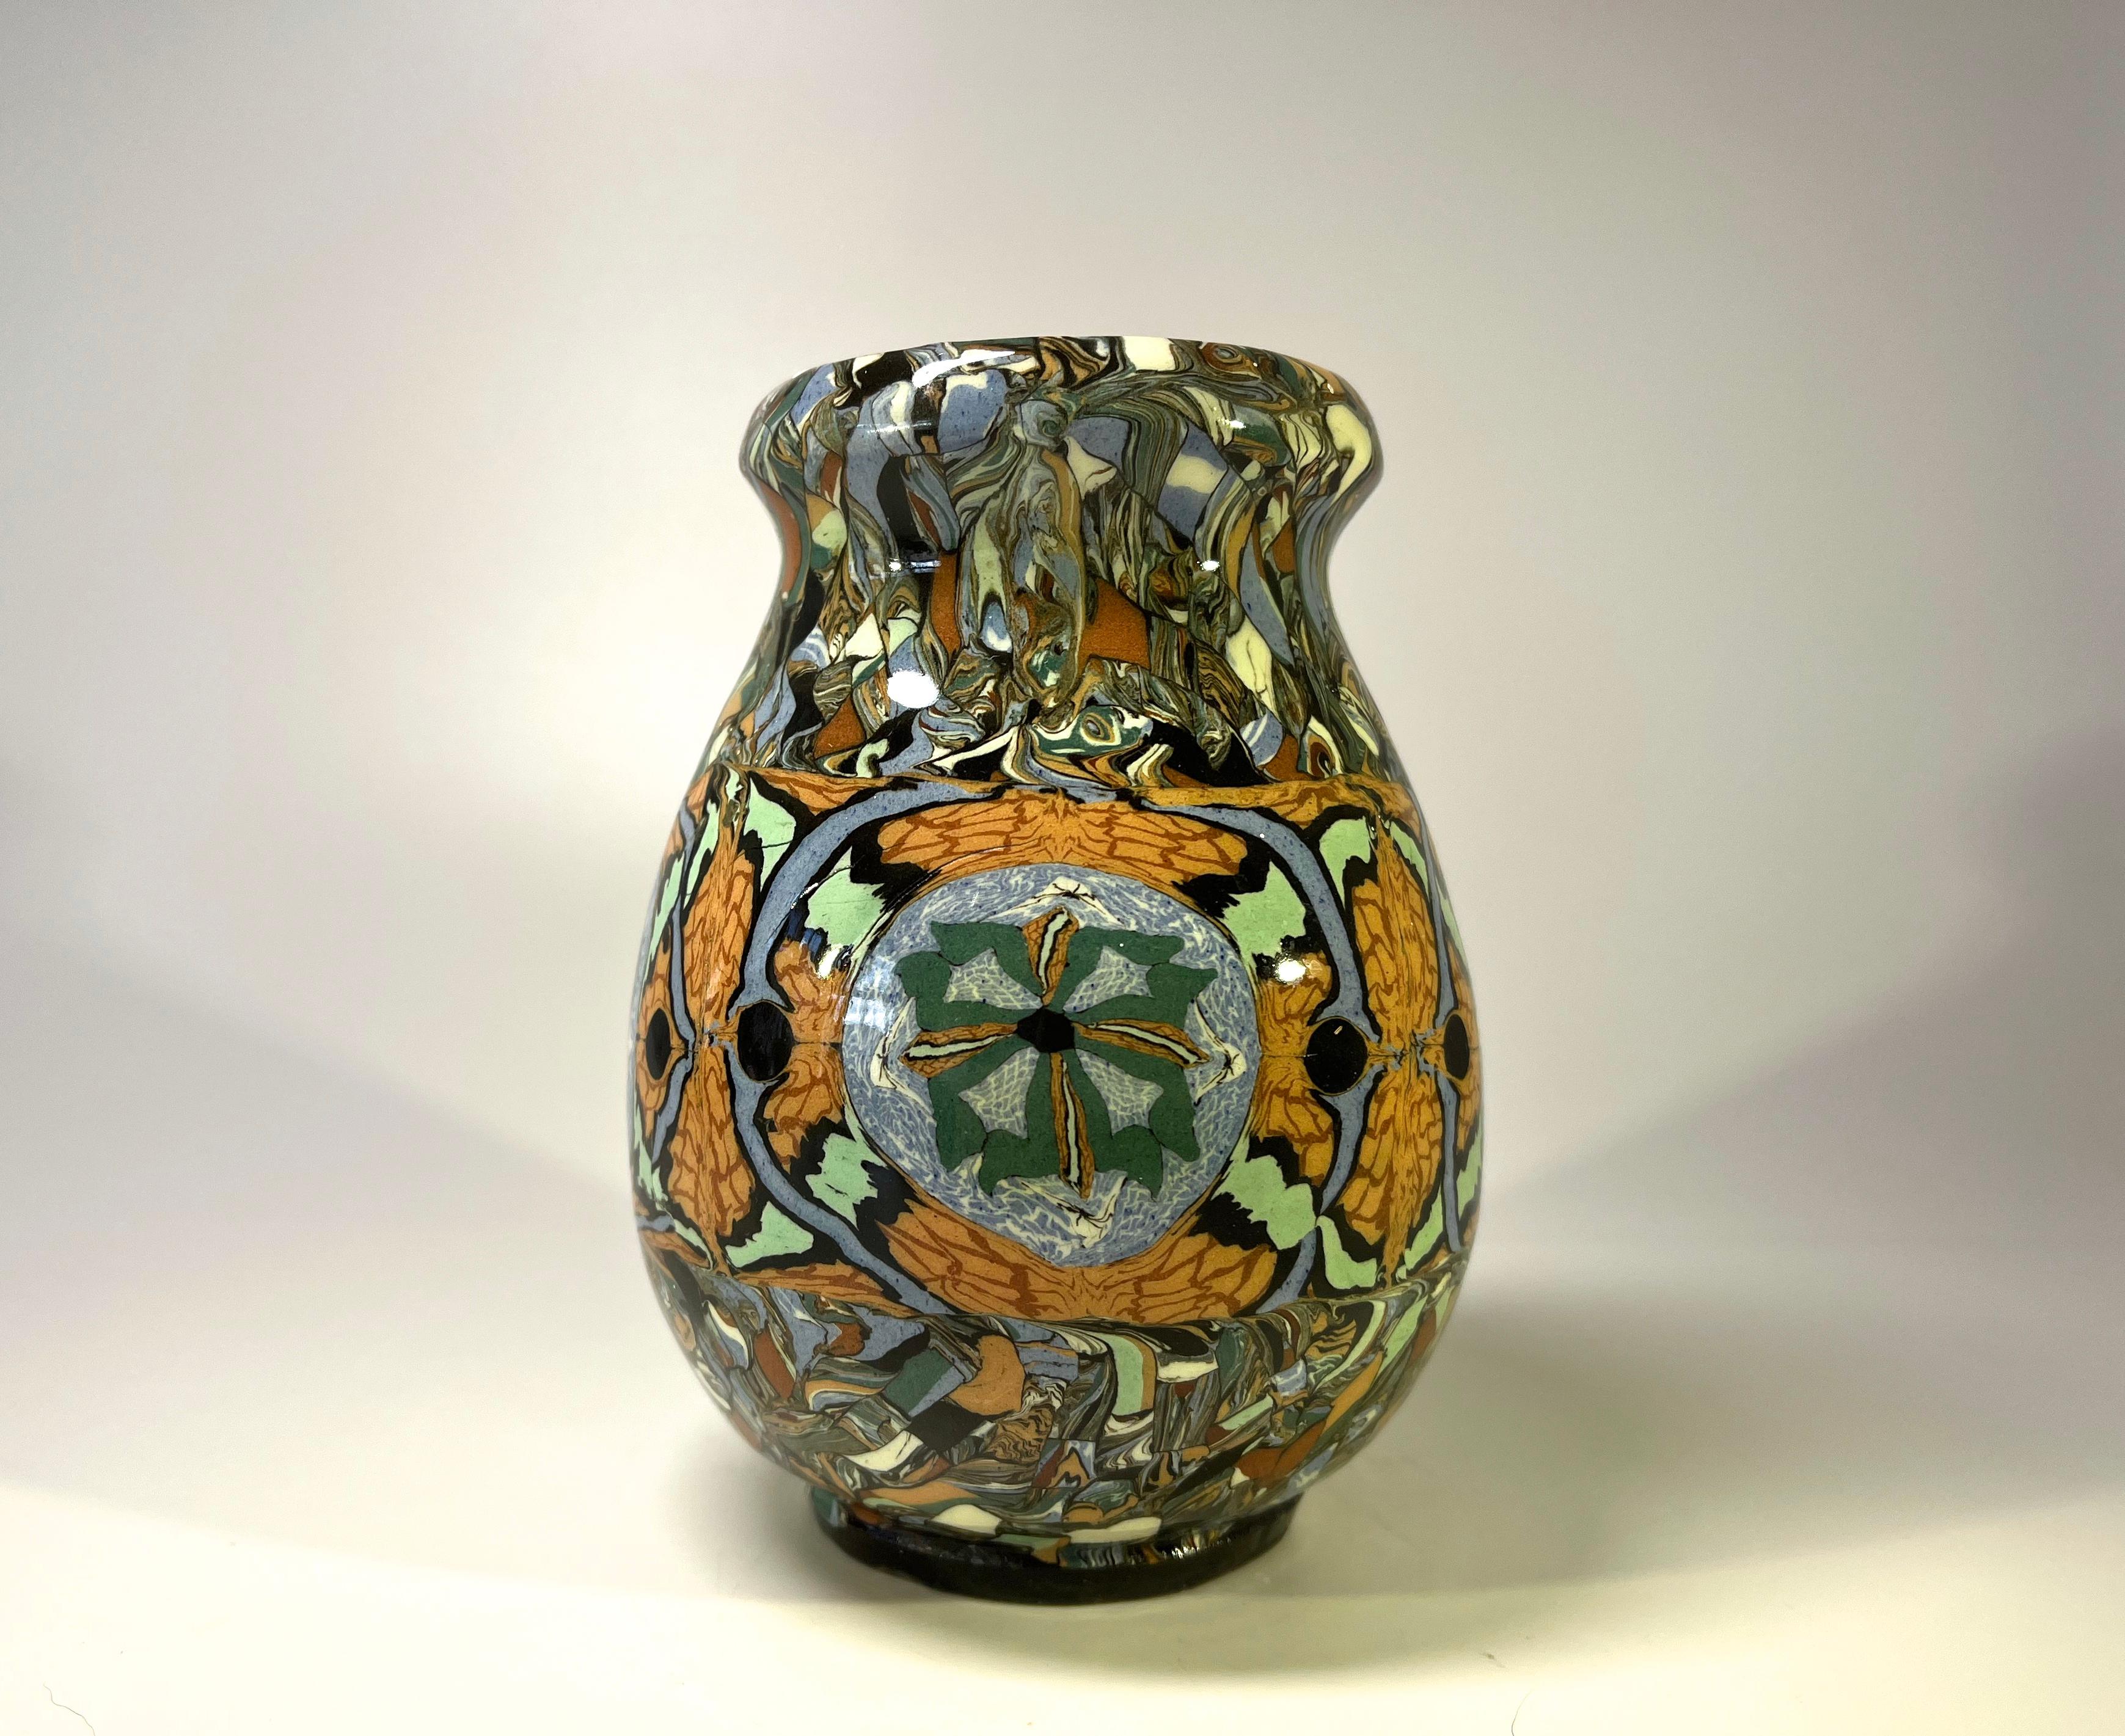 Jean Gerbino for Vallauris, France, ceramic glazed mosaic, shaped vase in muted tones
Fascinating mosaic design 
Circa 1960's
Signed Gerbino to base
Measures: Height 5.25 inch, diameter 4 inch, 
In very good condition. 
Wear consistent with